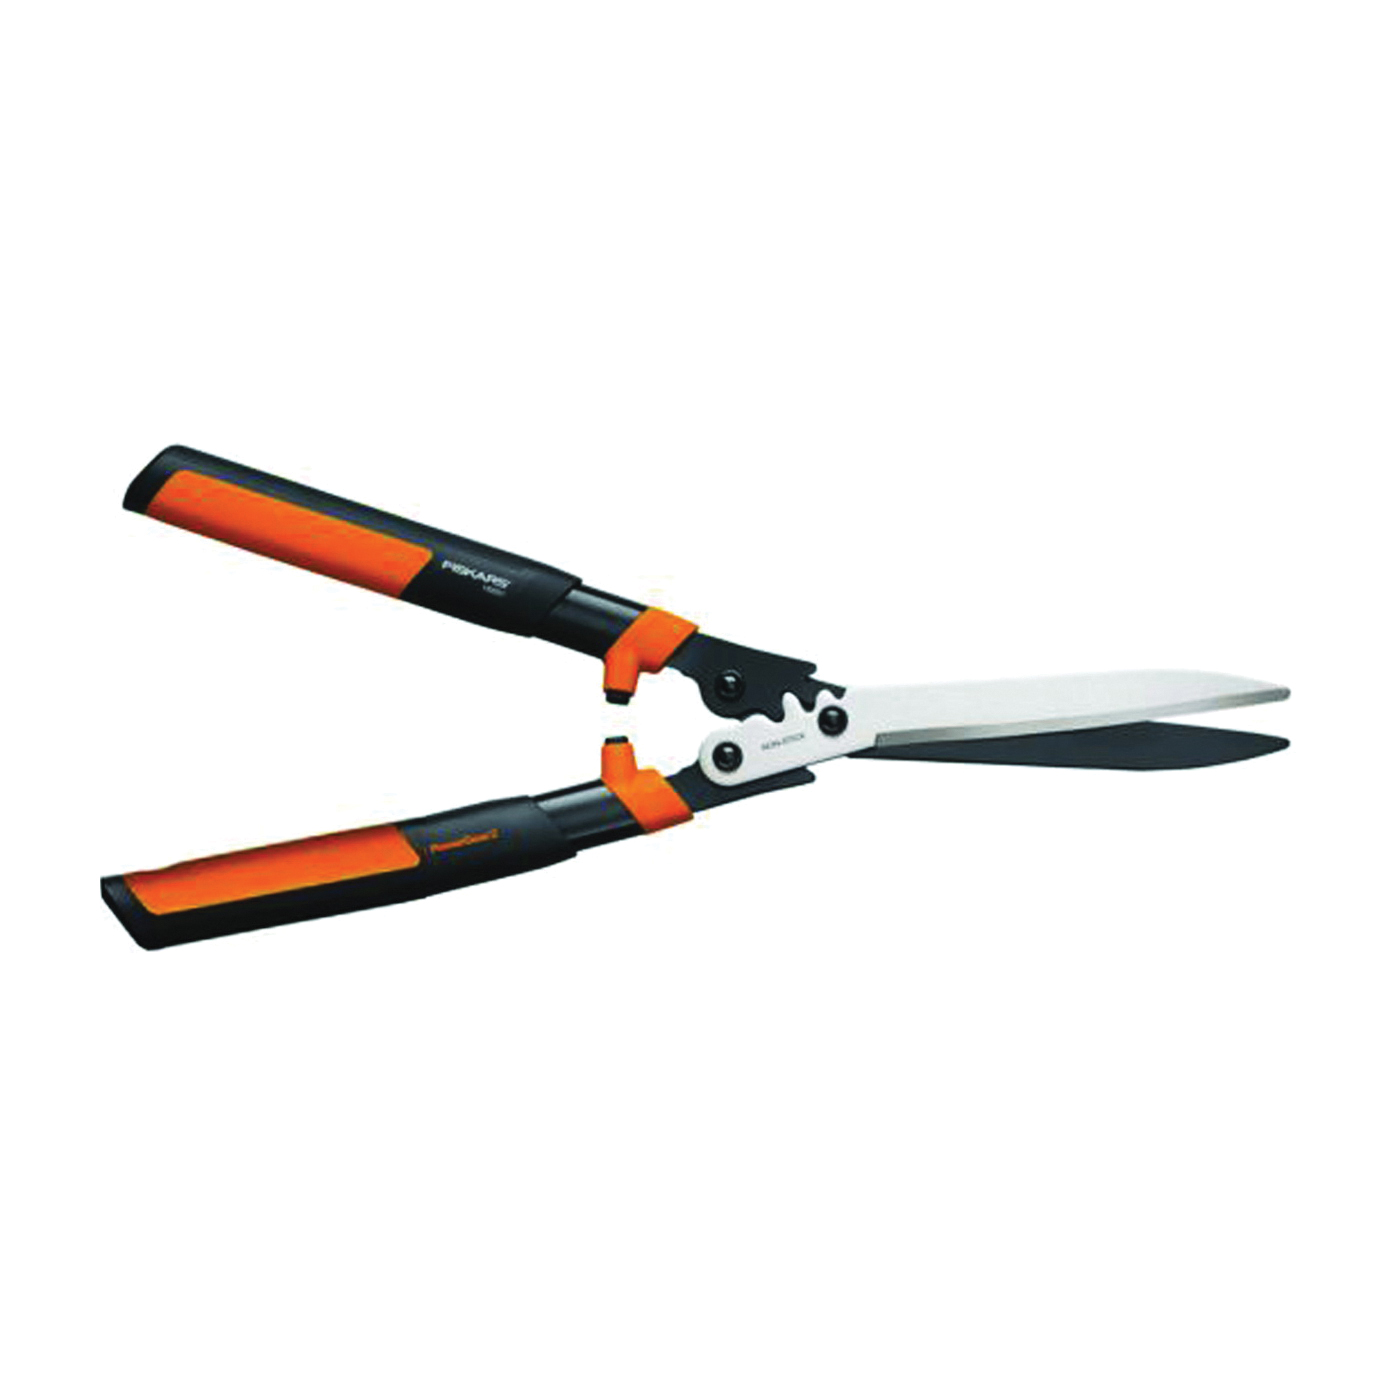 392861-1002 Hedge Shear, 10 in L Blade, Steel Blade, Aluminum Handle, Round Handle, 23 in OAL